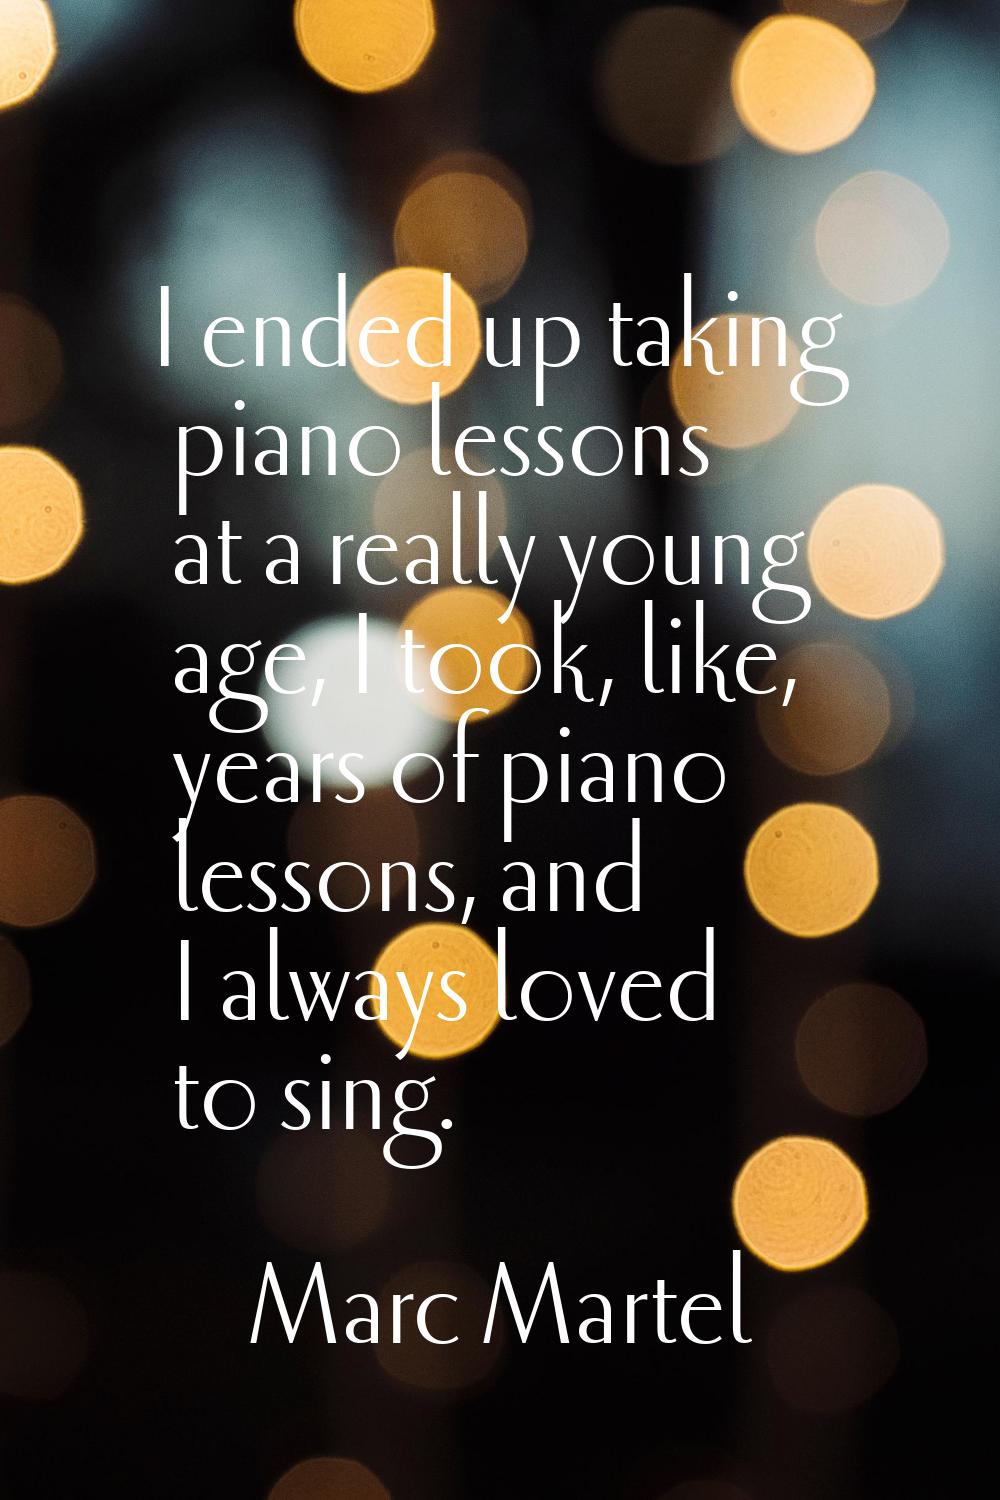 I ended up taking piano lessons at a really young age, I took, like, years of piano lessons, and I 